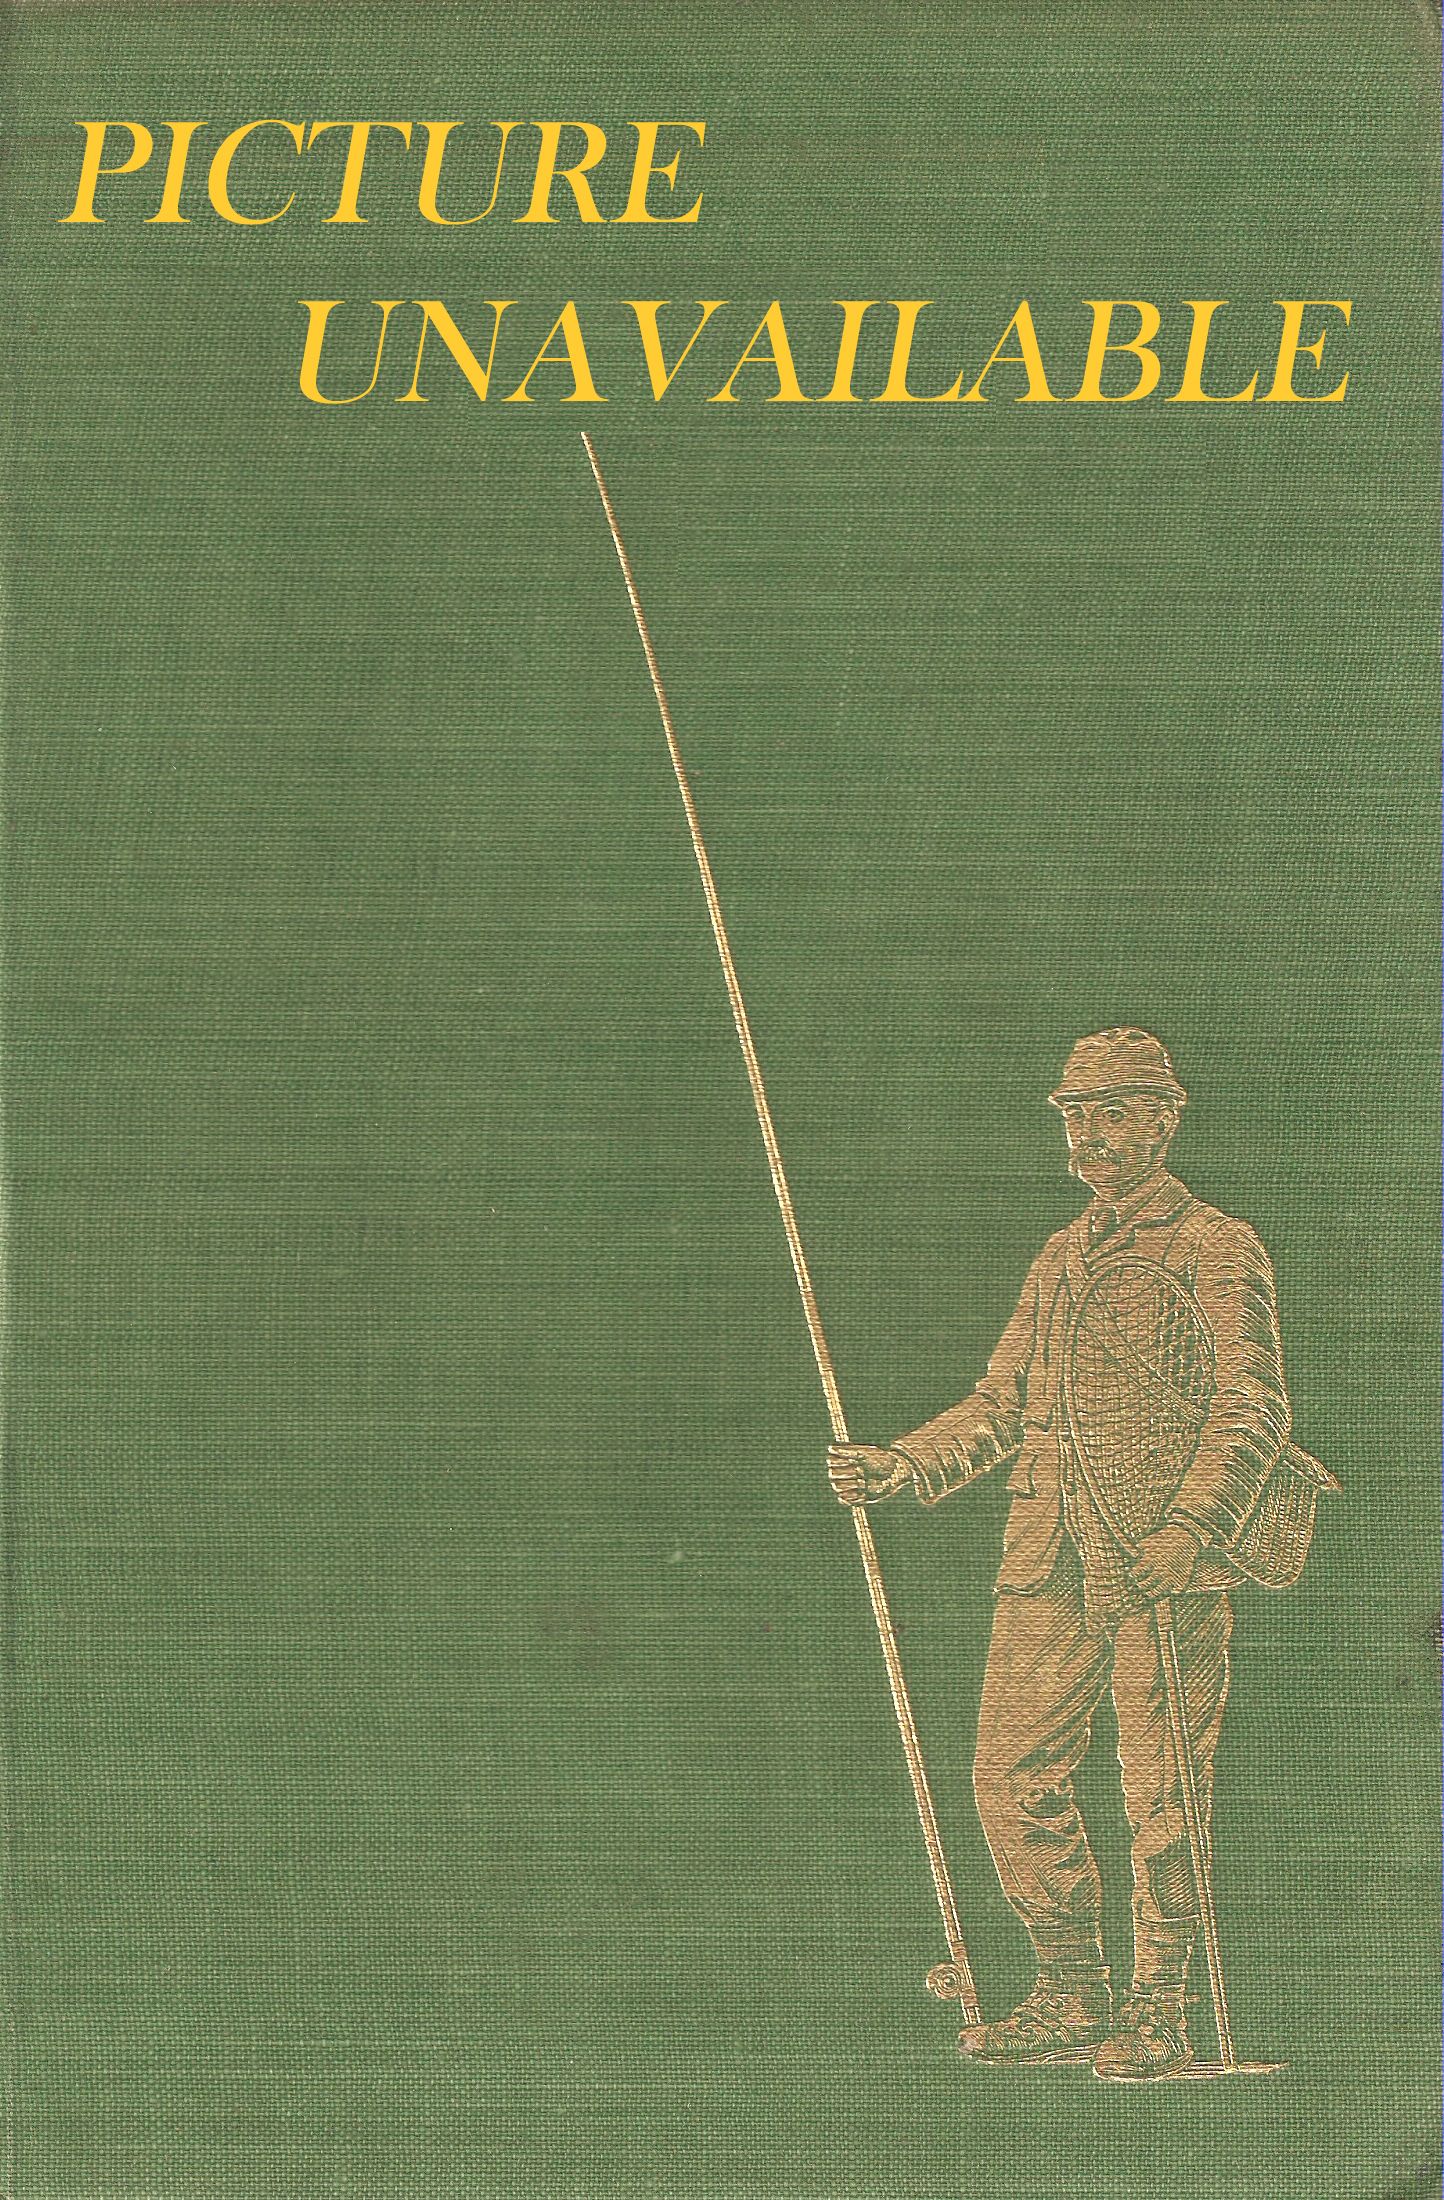 MCCLANE'S STANDARD FISHING ENCYCLOPEDIA AND INTERNATIONAL ANGLING GUIDE.  Edited by A.J. McClane.